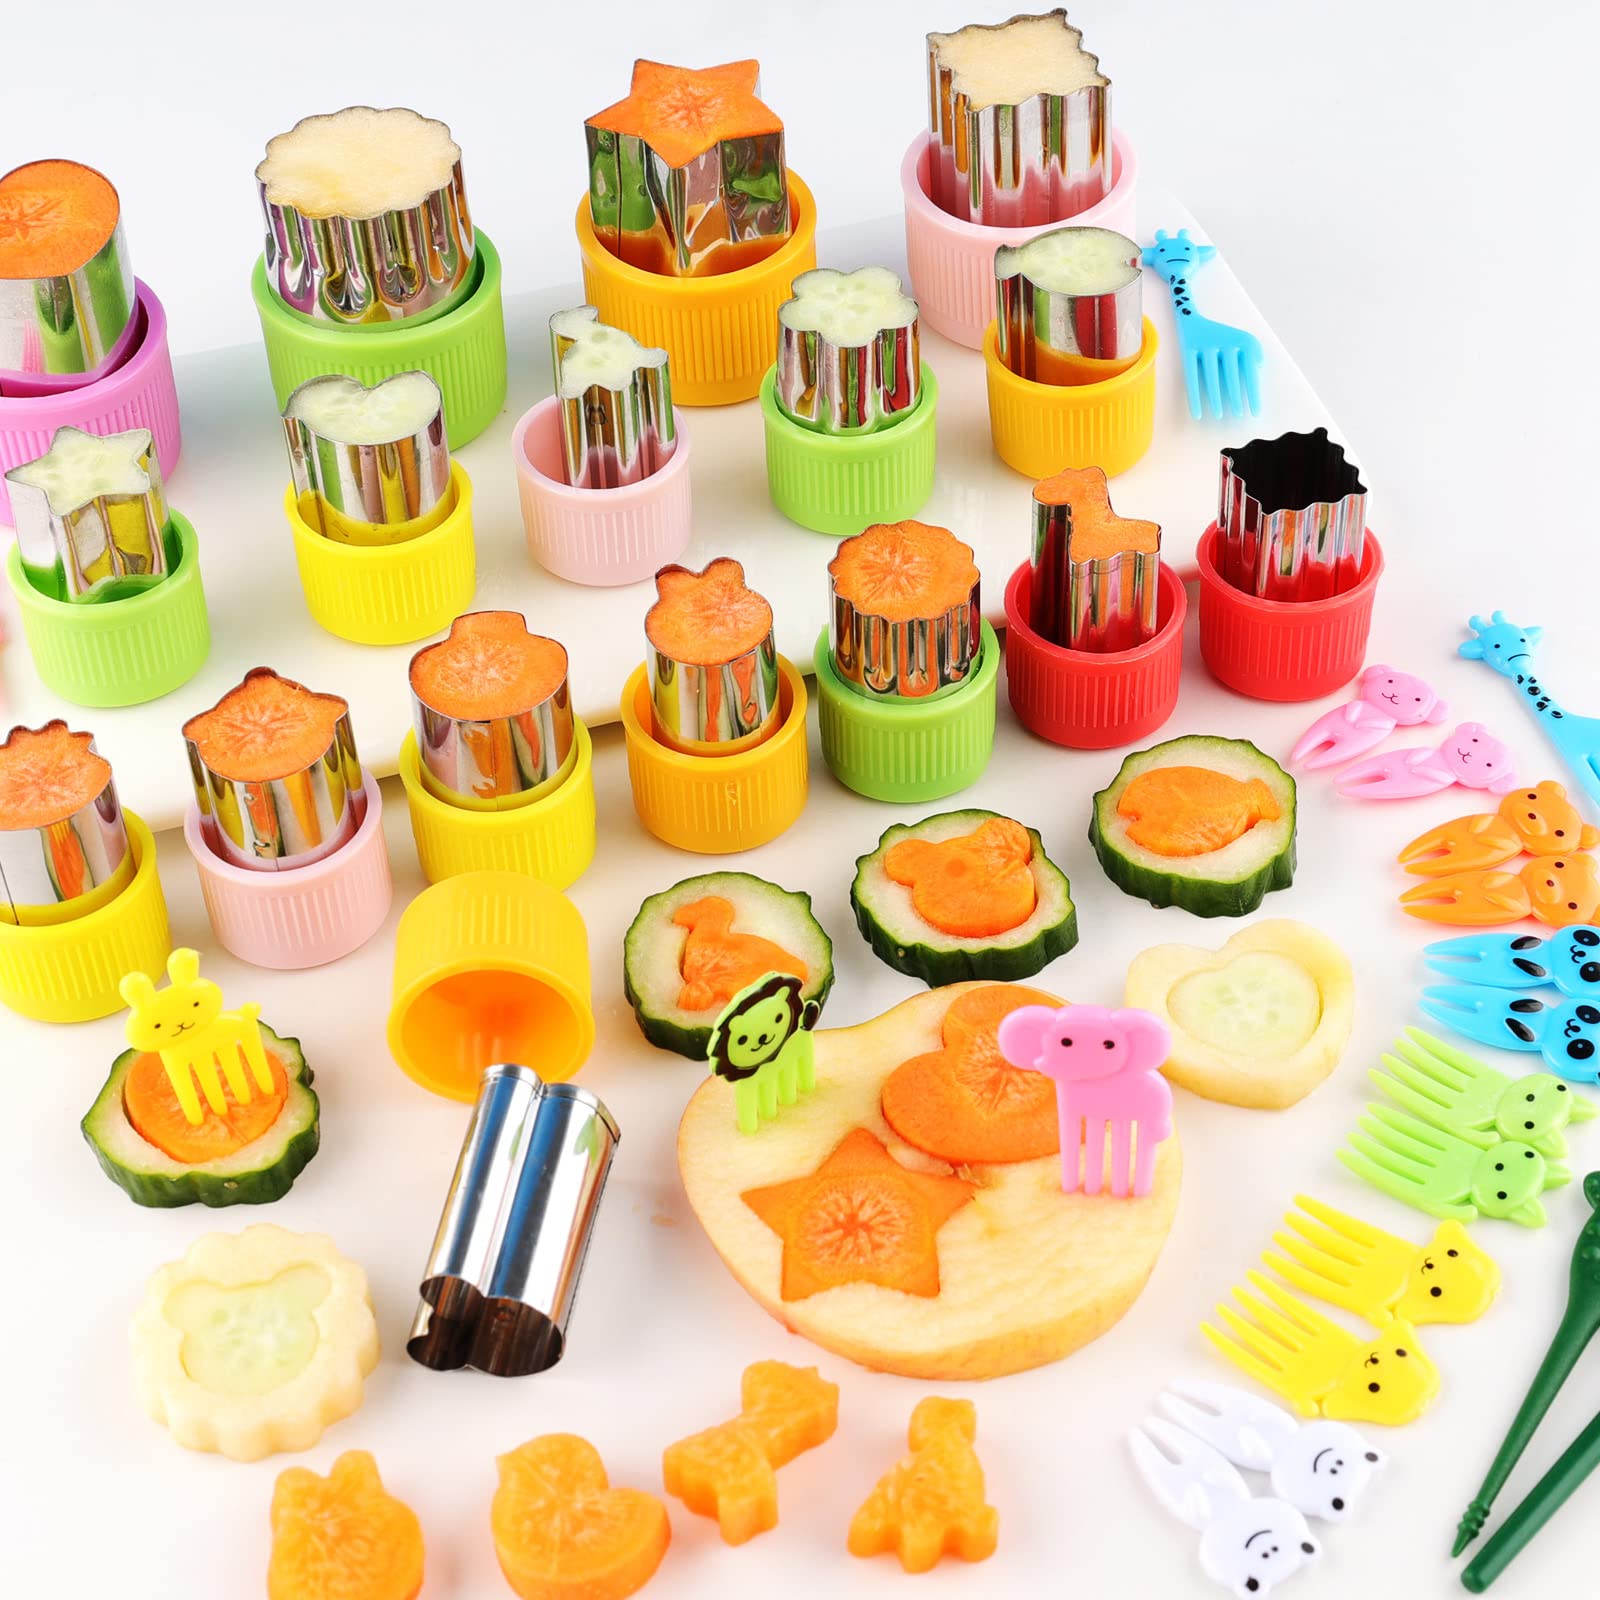 Vegetable Cutter Shapes Sets Mini Size Cutters Small Shaped Cutters Fruit Cutters Kids Food Cutters Pastry Stamps Mold for Biscuits,Pastry Dough,Fruits Toddler Lunch Homemade Baking